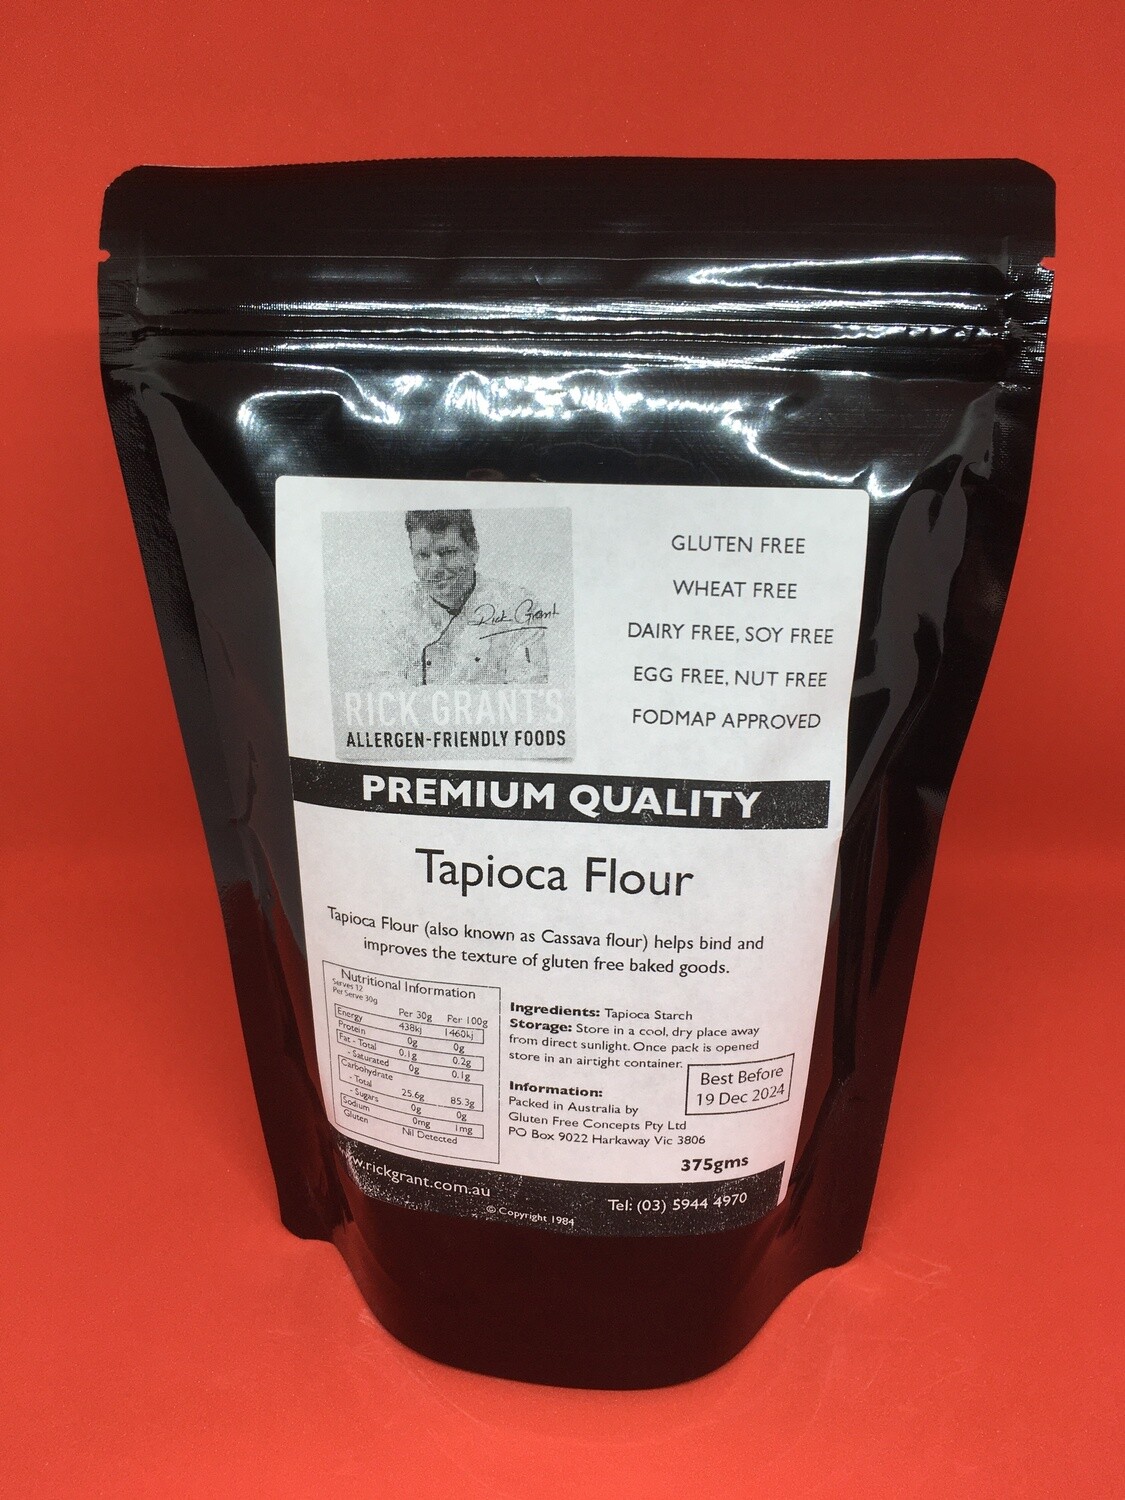 Rick Grant's GF Tapioca Flour
Rick Grant's Tapioca Flour is a very useful flour to add to your Gluten Free pantry. Tapioca Flour is used for thickening sauces, gravies or sweet sauces.